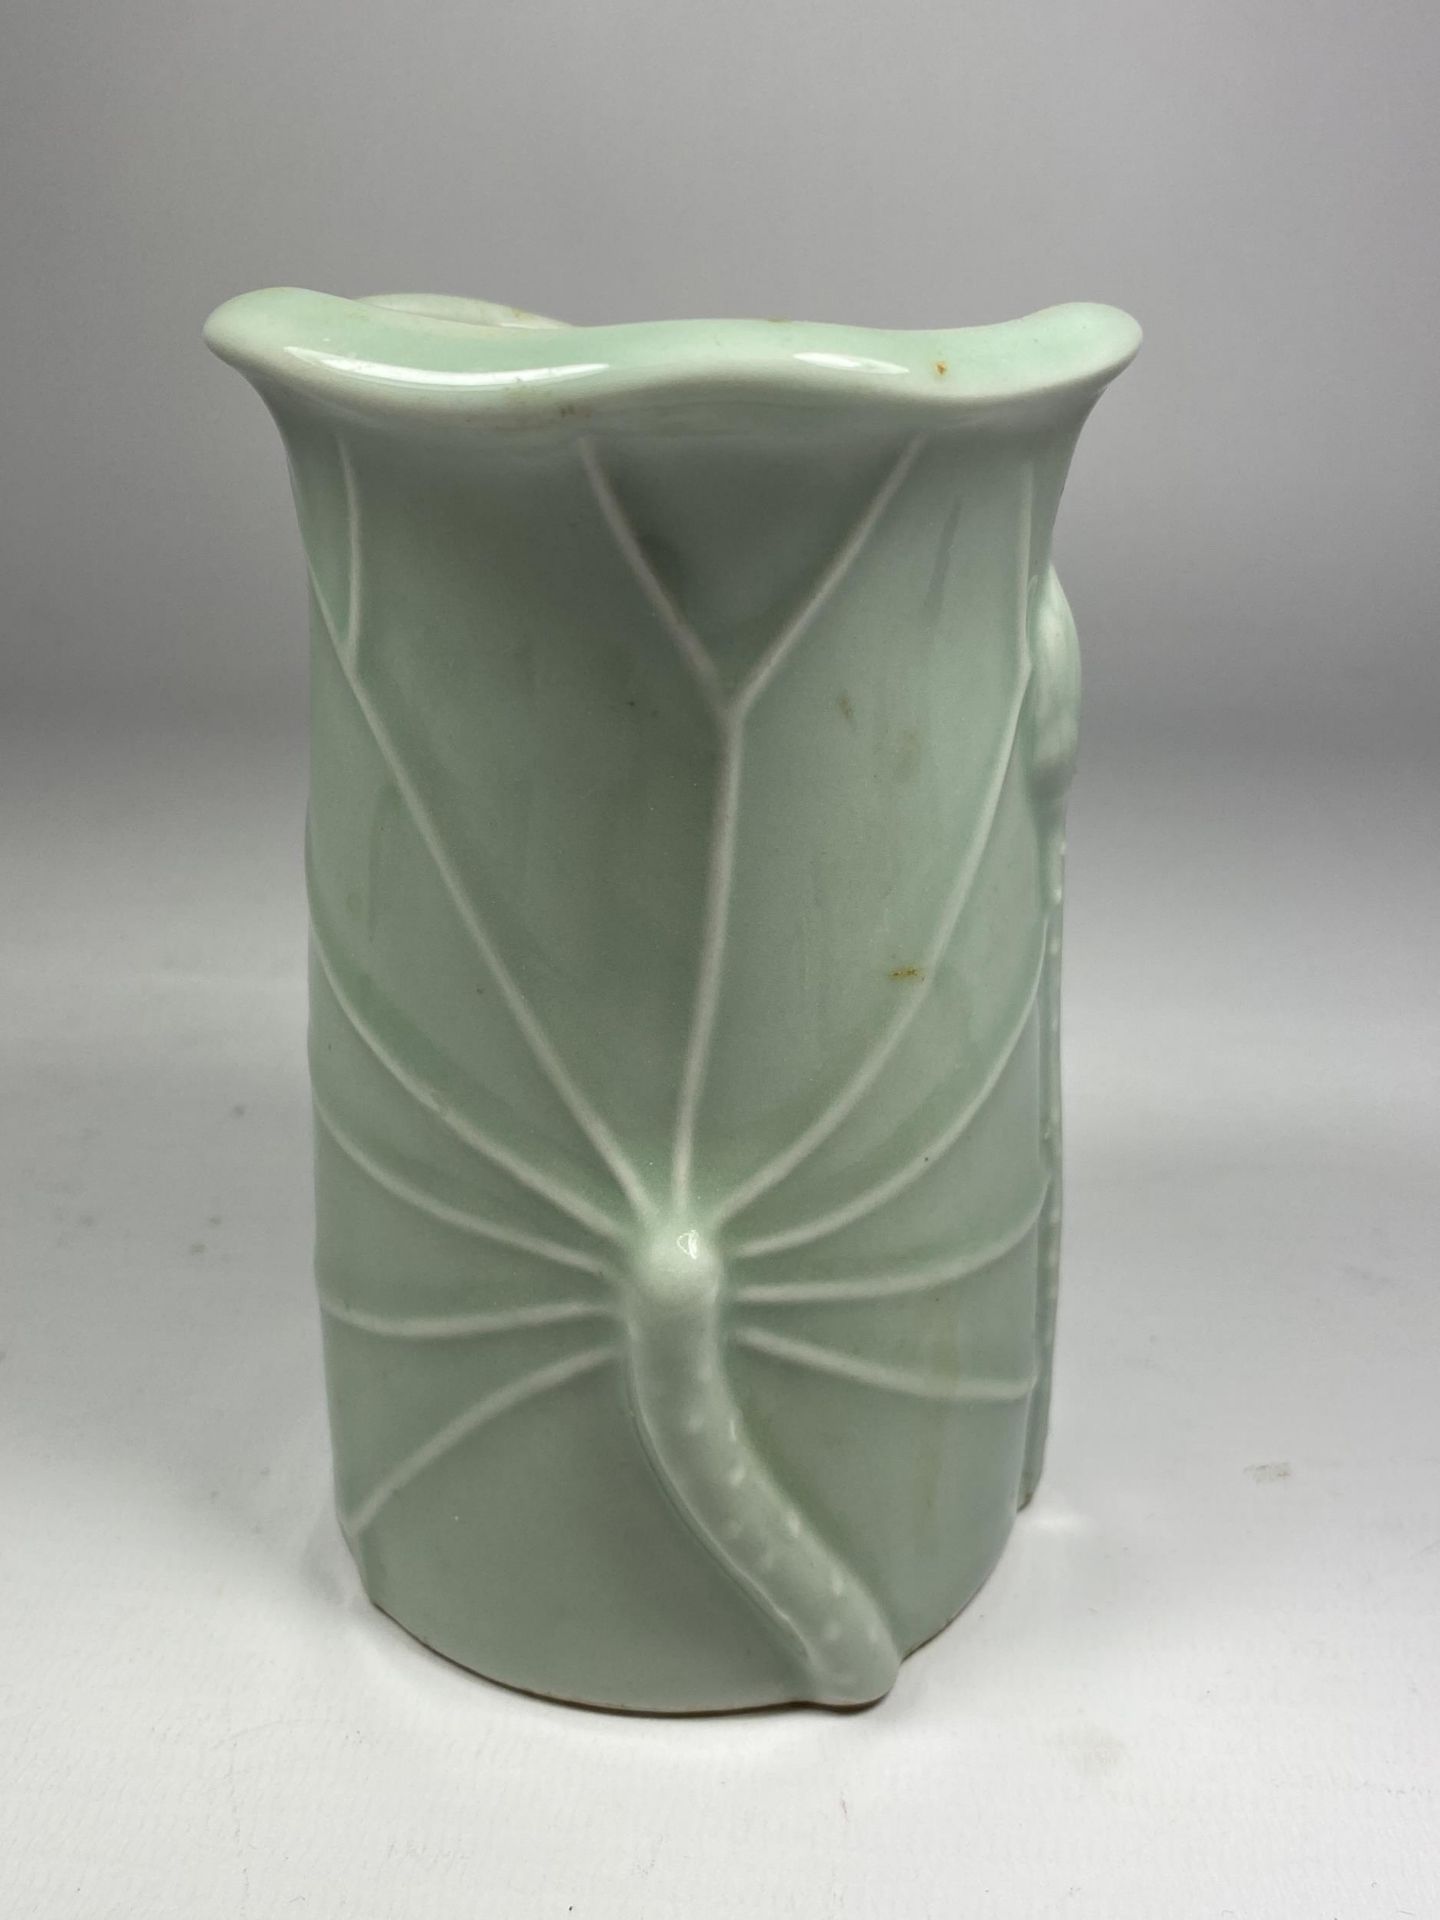 A CHINESE CELADON PORCELAIN VASE WITH STEM DESIGN, UNMARKED TO BASE, HEIGHT 12.5CM